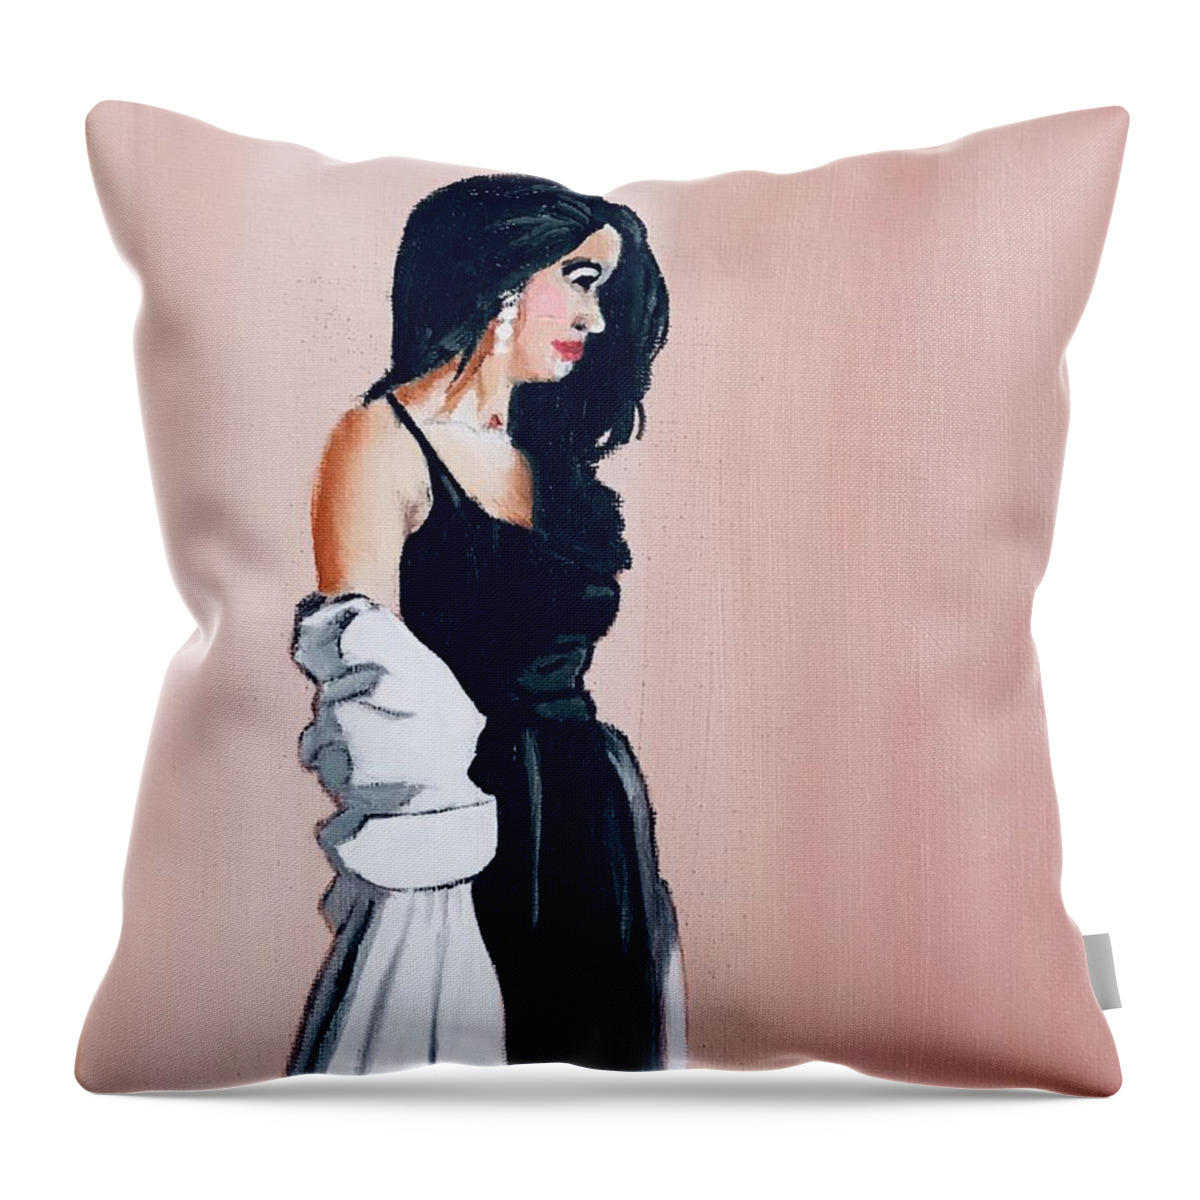 Original Art Work Throw Pillow featuring the painting Waiting. Original Oil Painting by Theresa Honeycheck